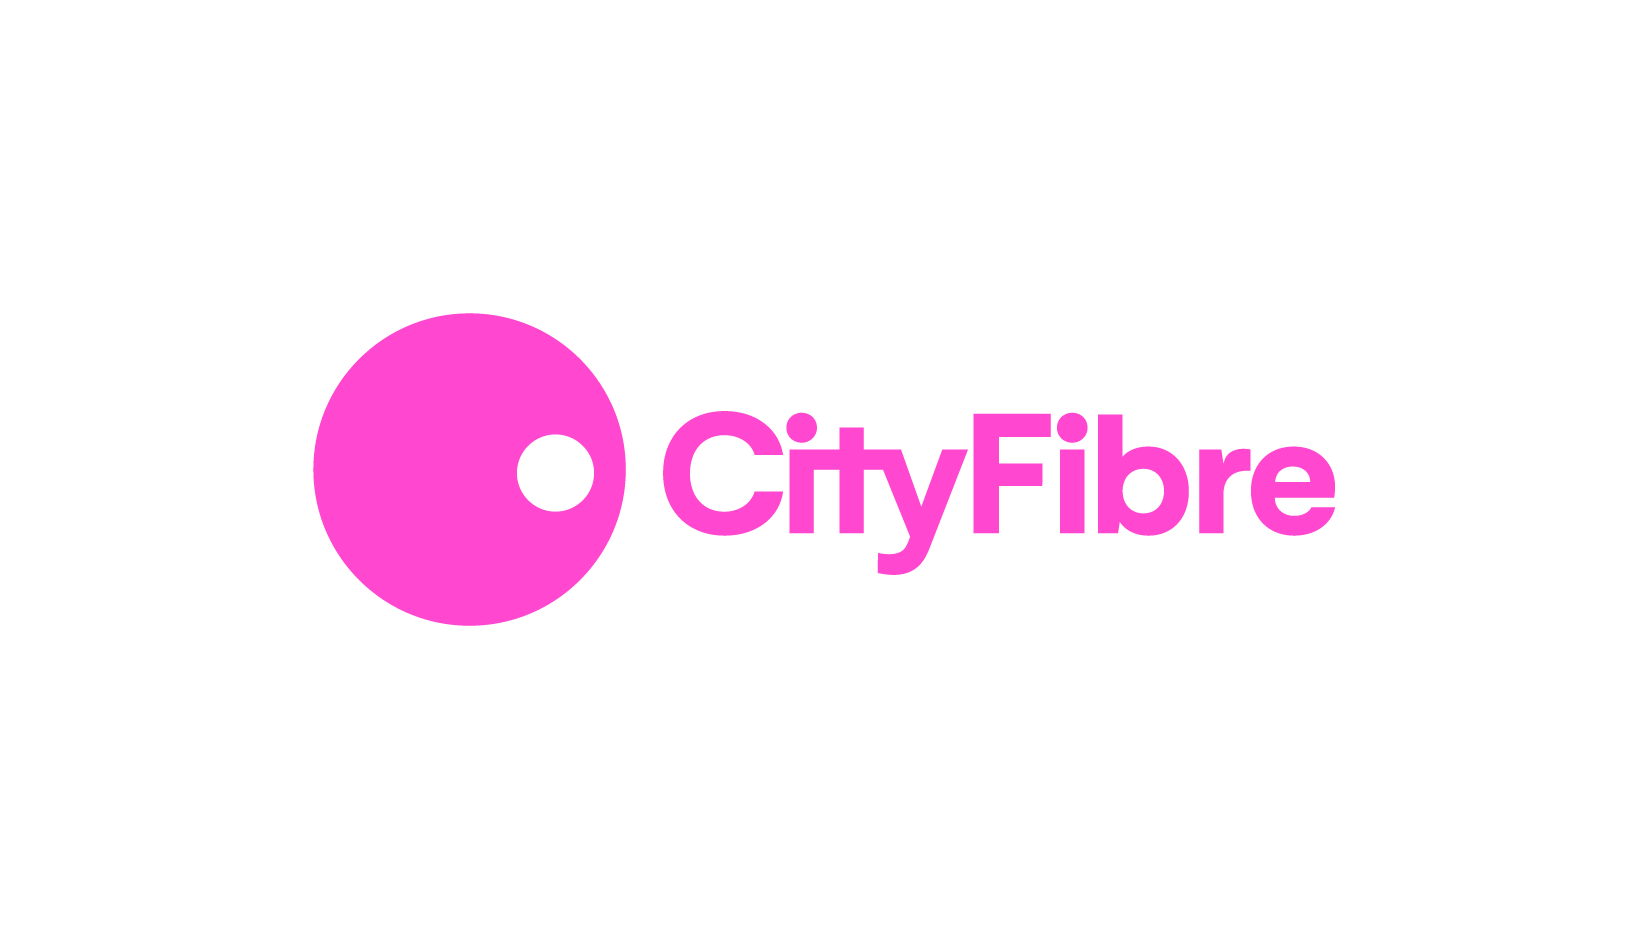 OHSF-PR-08-04 Part Two Cityfibre Supply Chain Partner Assessment  Version 1 Revision 1 dated 03/06/2019 - duplicate